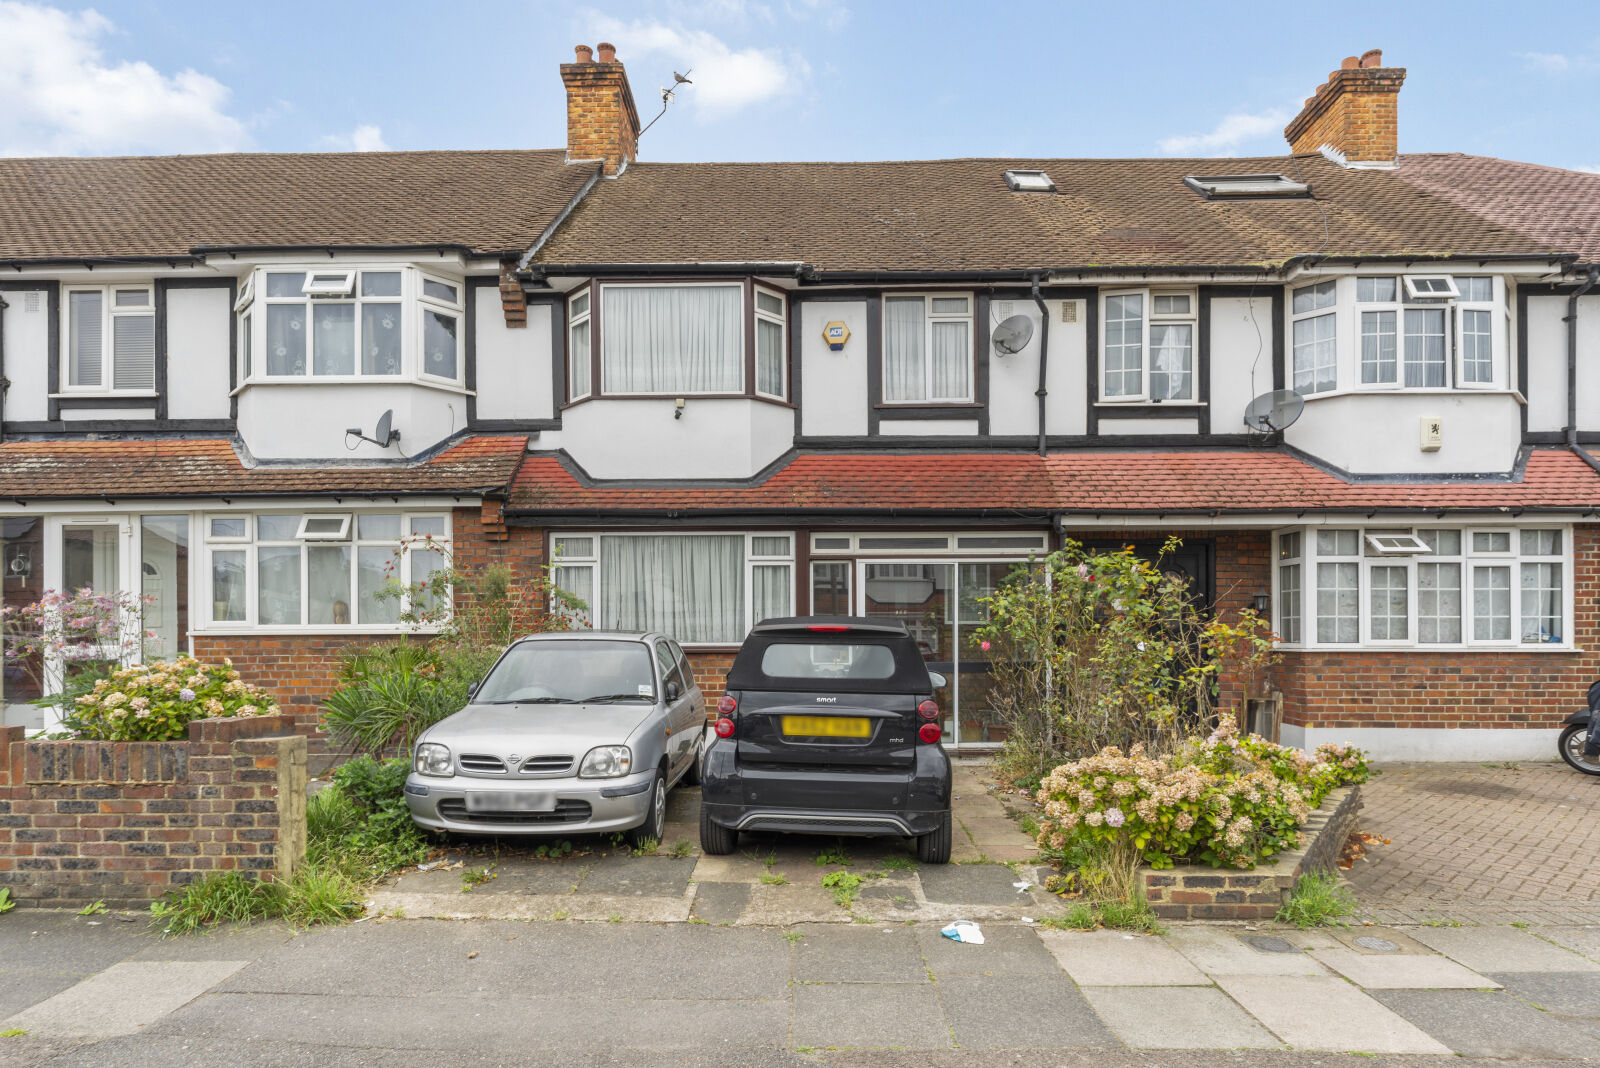 3 bedroom mid terraced house for sale Chestnut Grove, Mitcham, CR4, main image